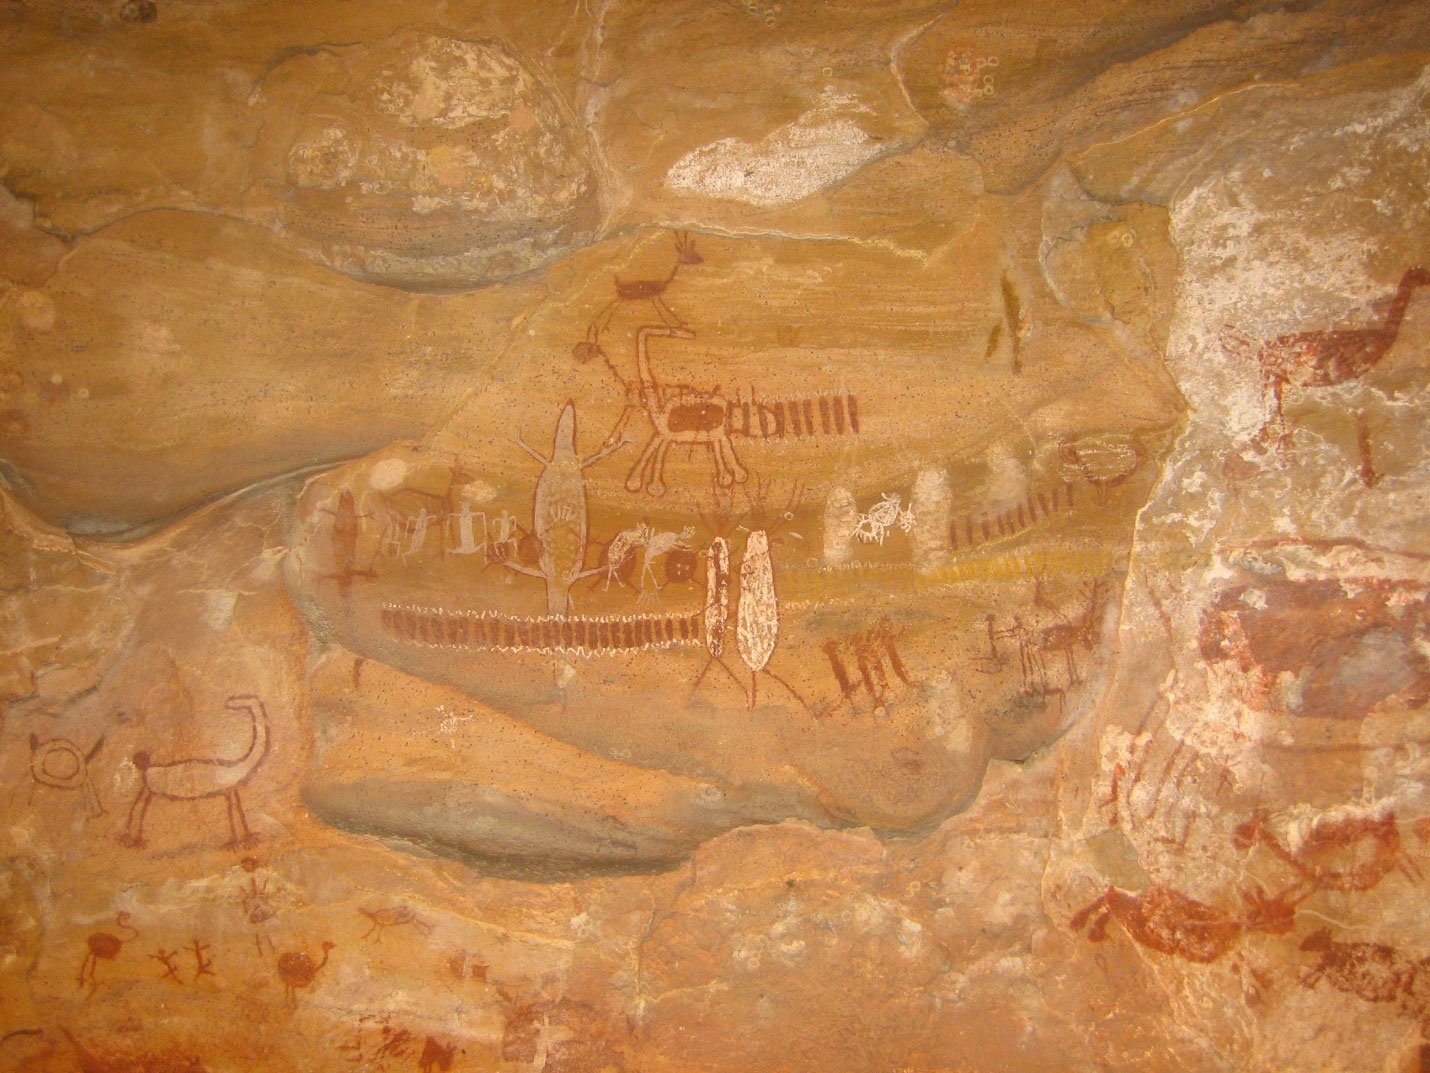 Picture of a rock painting located in the Serra da Capivara National Park, Brazil. The artist depicted various animals, including reptiles.